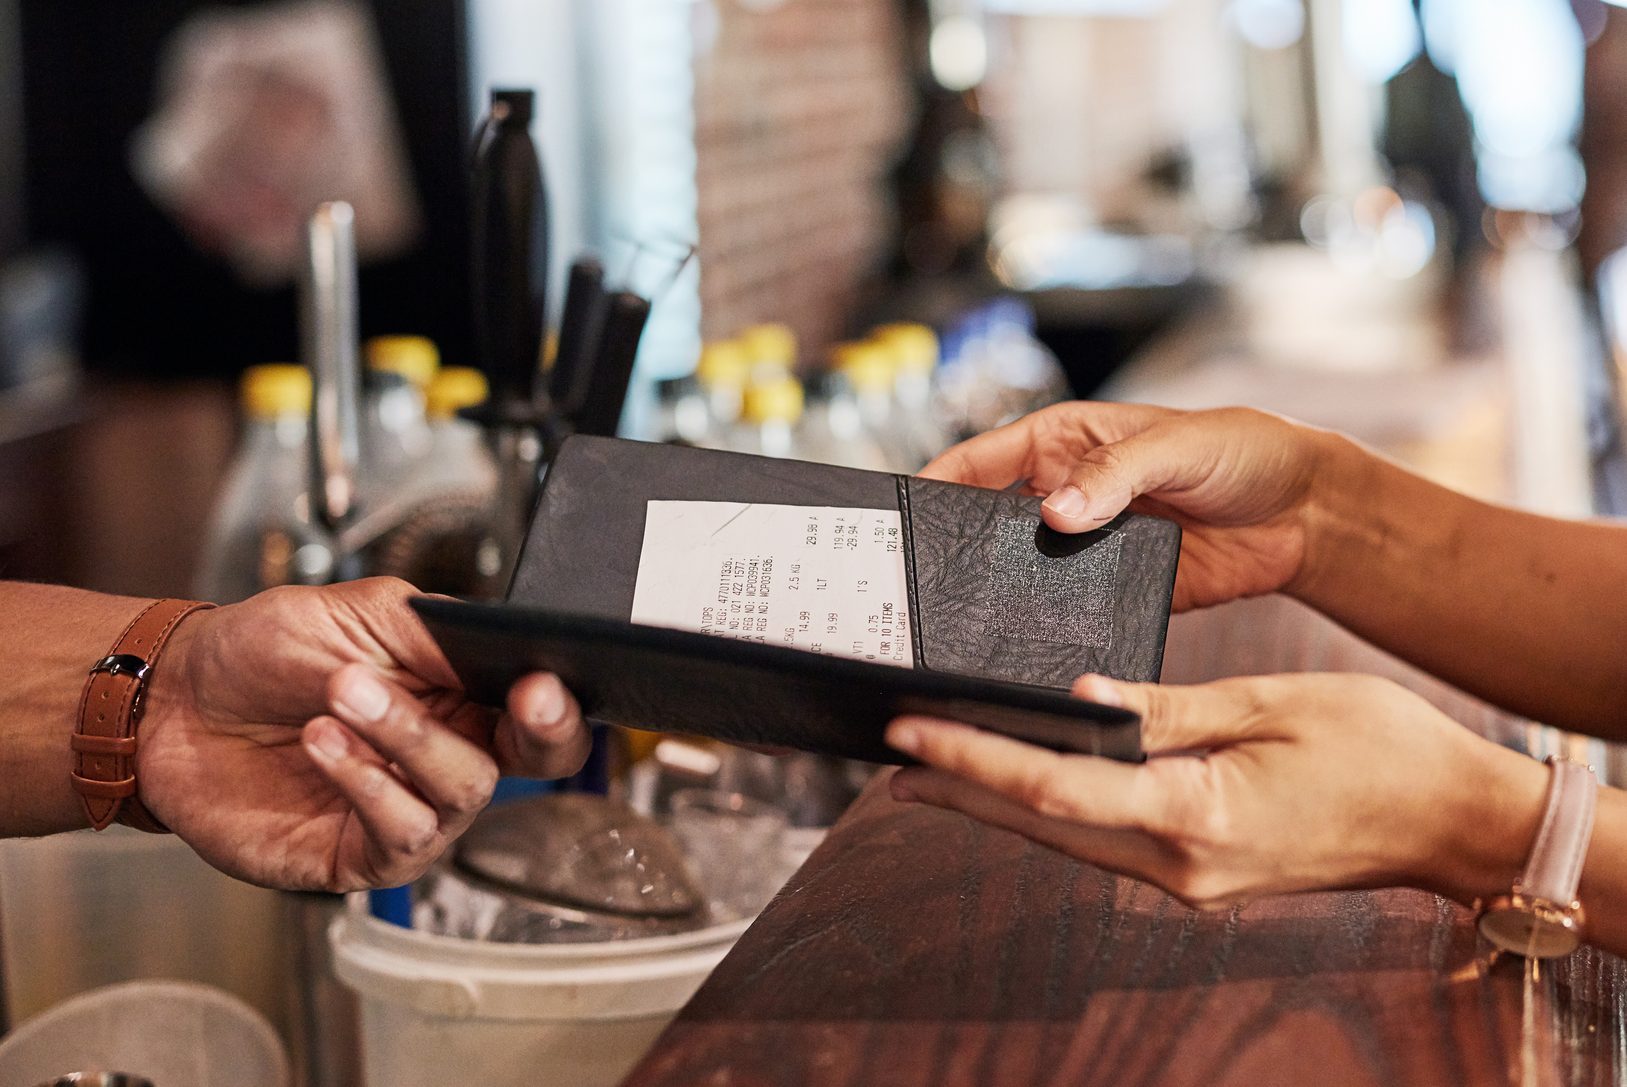 Would a Restaurant Really Make You Wash Dishes If You Can't Pay the Bill?